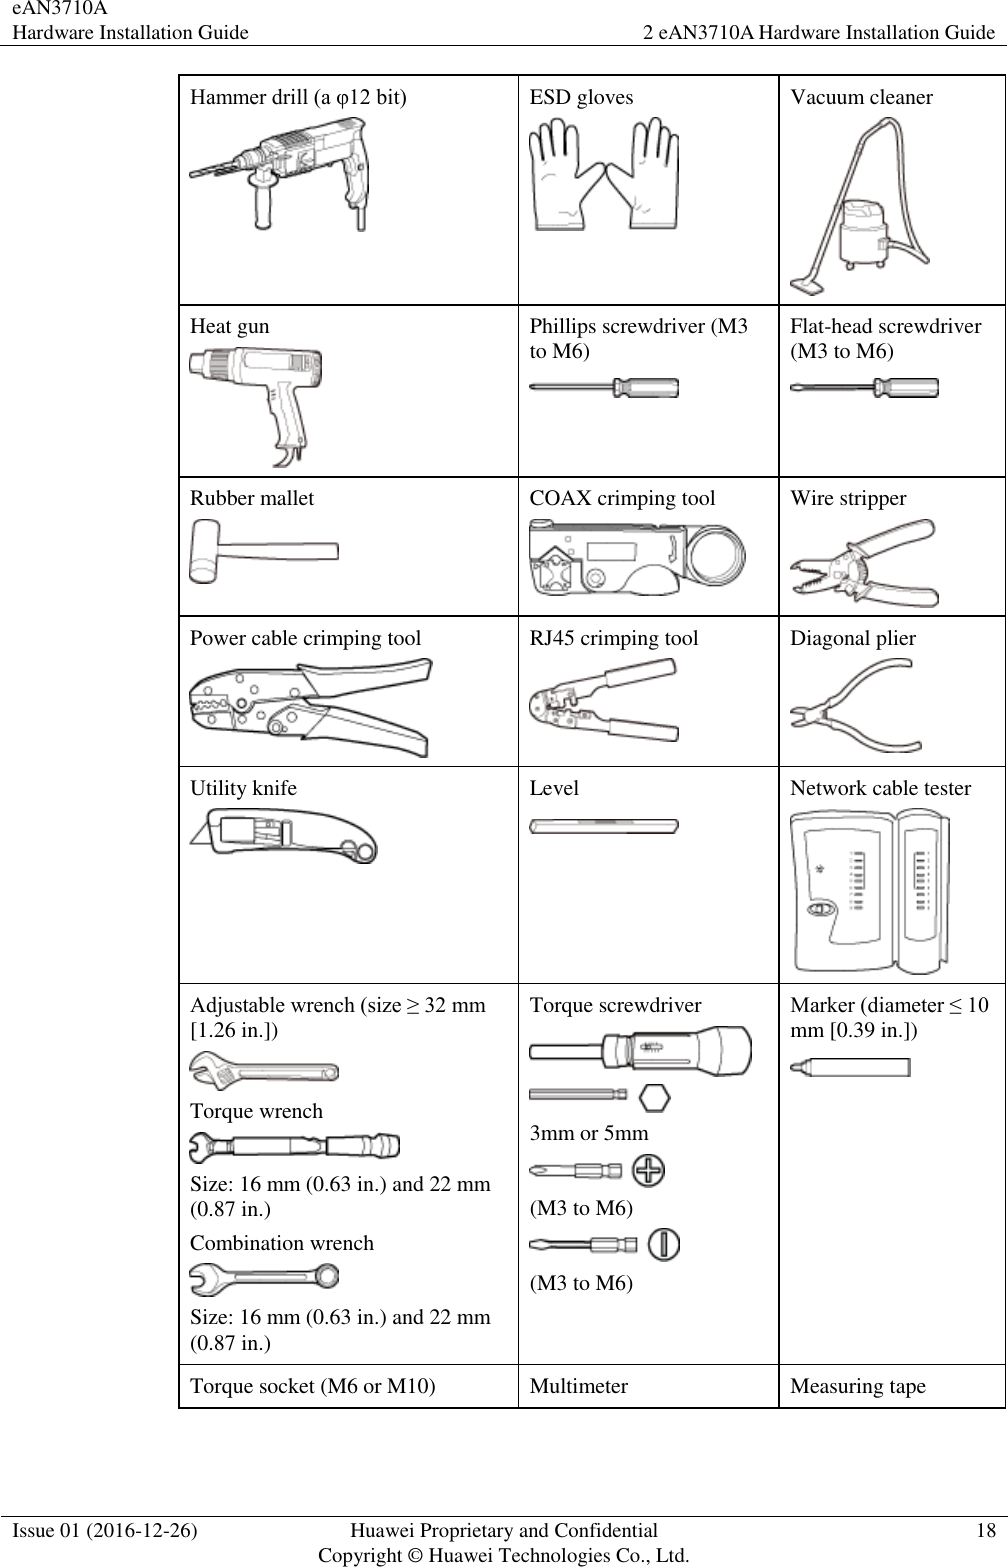 eAN3710A Hardware Installation Guide 2 eAN3710A Hardware Installation Guide  Issue 01 (2016-12-26) Huawei Proprietary and Confidential                                     Copyright © Huawei Technologies Co., Ltd. 18  Hammer drill (a φ12 bit)    ESD gloves  Vacuum cleaner  Heat gun  Phillips screwdriver (M3 to M6)  Flat-head screwdriver (M3 to M6)  Rubber mallet  COAX crimping tool  Wire stripper  Power cable crimping tool  RJ45 crimping tool  Diagonal plier  Utility knife  Level  Network cable tester  Adjustable wrench (size ≥ 32 mm [1.26 in.])  Torque wrench  Size: 16 mm (0.63 in.) and 22 mm (0.87 in.) Combination wrench  Size: 16 mm (0.63 in.) and 22 mm (0.87 in.) Torque screwdriver   3mm or 5mm  (M3 to M6)  (M3 to M6) Marker (diameter ≤ 10 mm [0.39 in.])    Torque socket (M6 or M10) Multimeter Measuring tape 